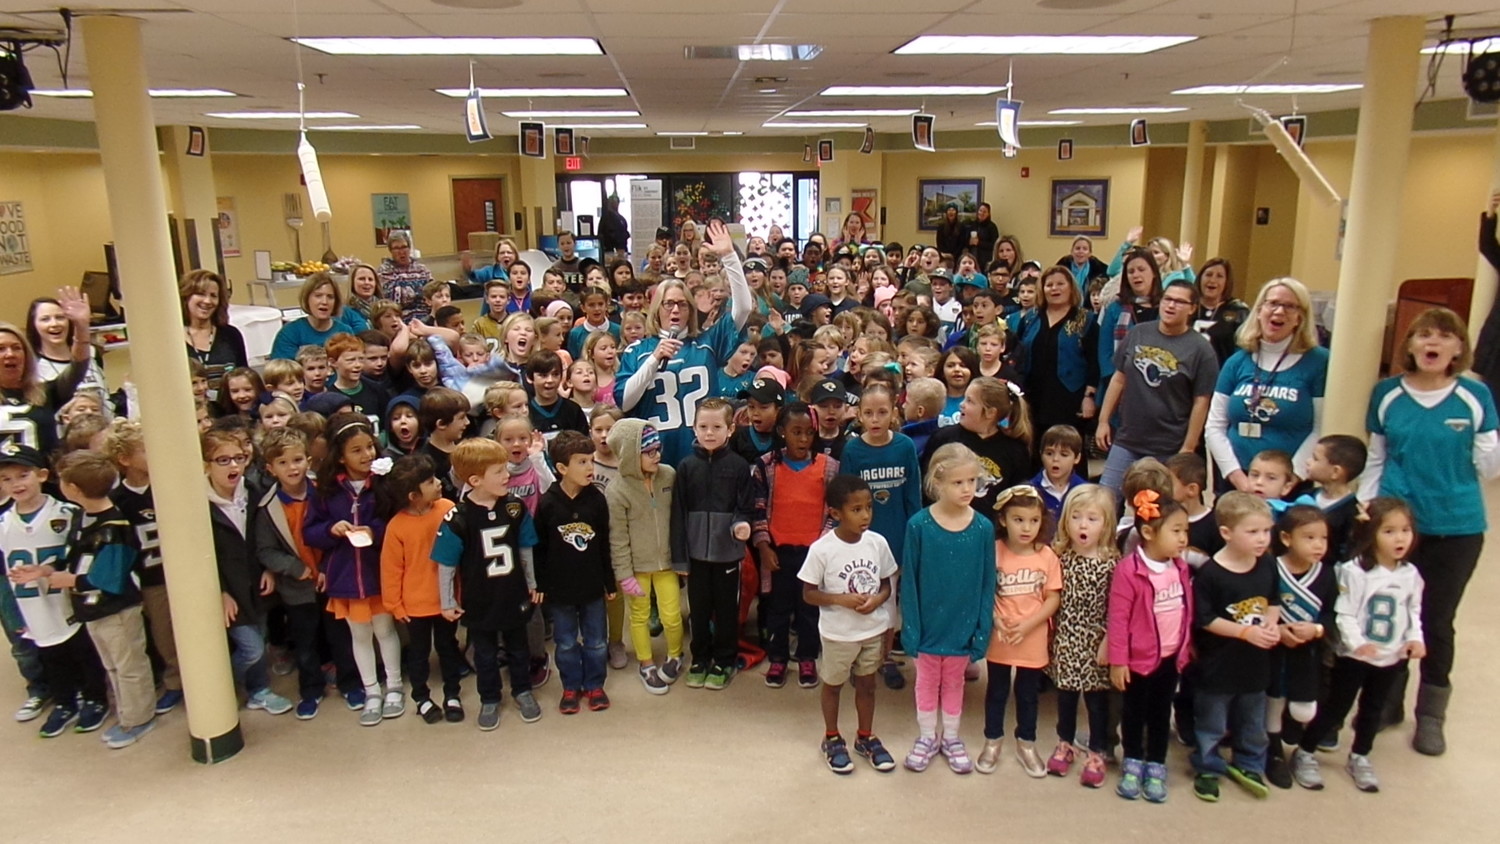 The Bolles Lower School Ponte Vedra Beach Campus wore more teal and black than orange and blue Friday, Jan. 19, during the school’s Jaguars Spirit Day leading up to the team’s AFC Championship matchup with the New England Patriots. At the direction of Ponte Vedra Beach Campus Head Peggy Campbell-Rush, students and faculty convened in Ponte Vedra Hall after their flag ceremony for a group chant of “We are Jaguars,” and “Duval.”